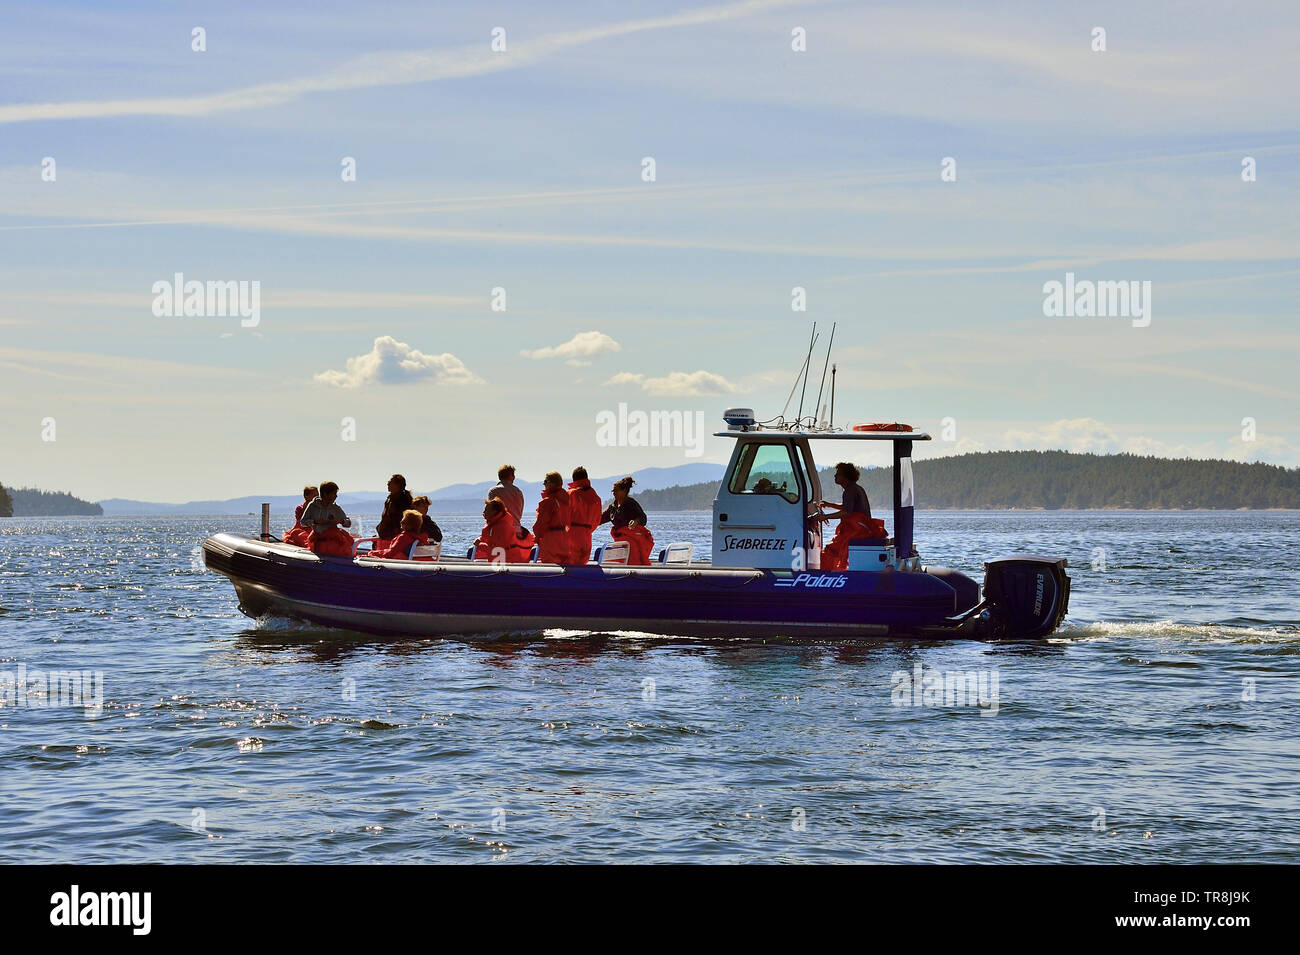 A group of people on a whale watching expedition in waters of the Stewart Channel near Vancouver Island British Columbia, Canada. Stock Photo